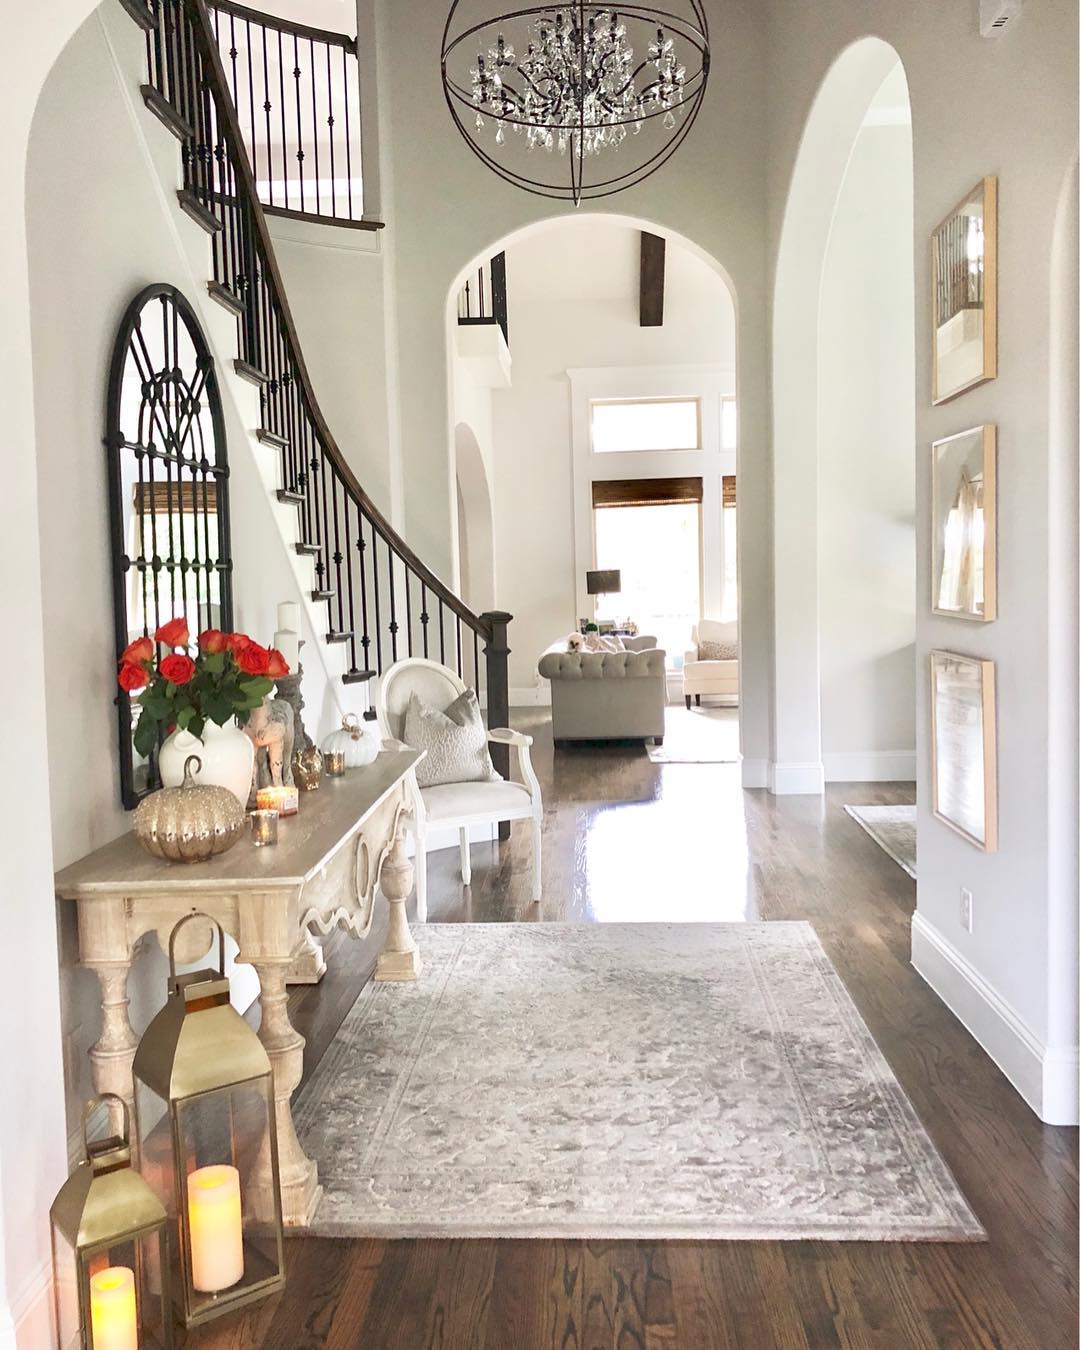 Tidy Home Entryway with Festive Decorations. Photo by Instagram user @classicstylehome